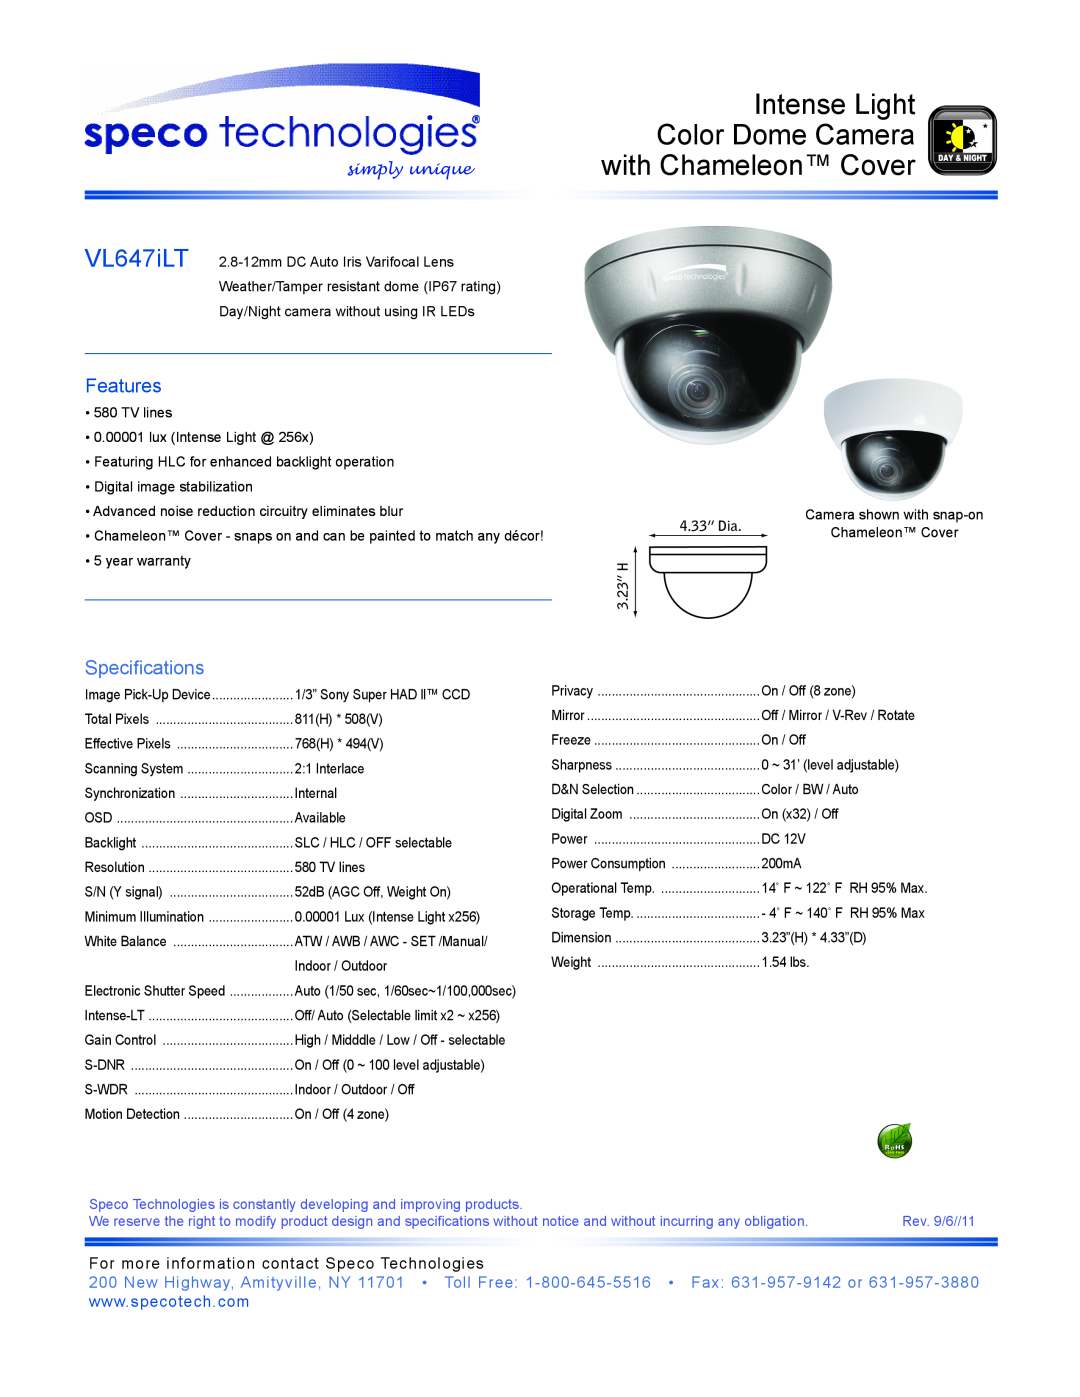 Speco Technologies VL647ILT warranty Intense Light, Color Dome Camera MP with Chameleon Cover, Features, Specifications 